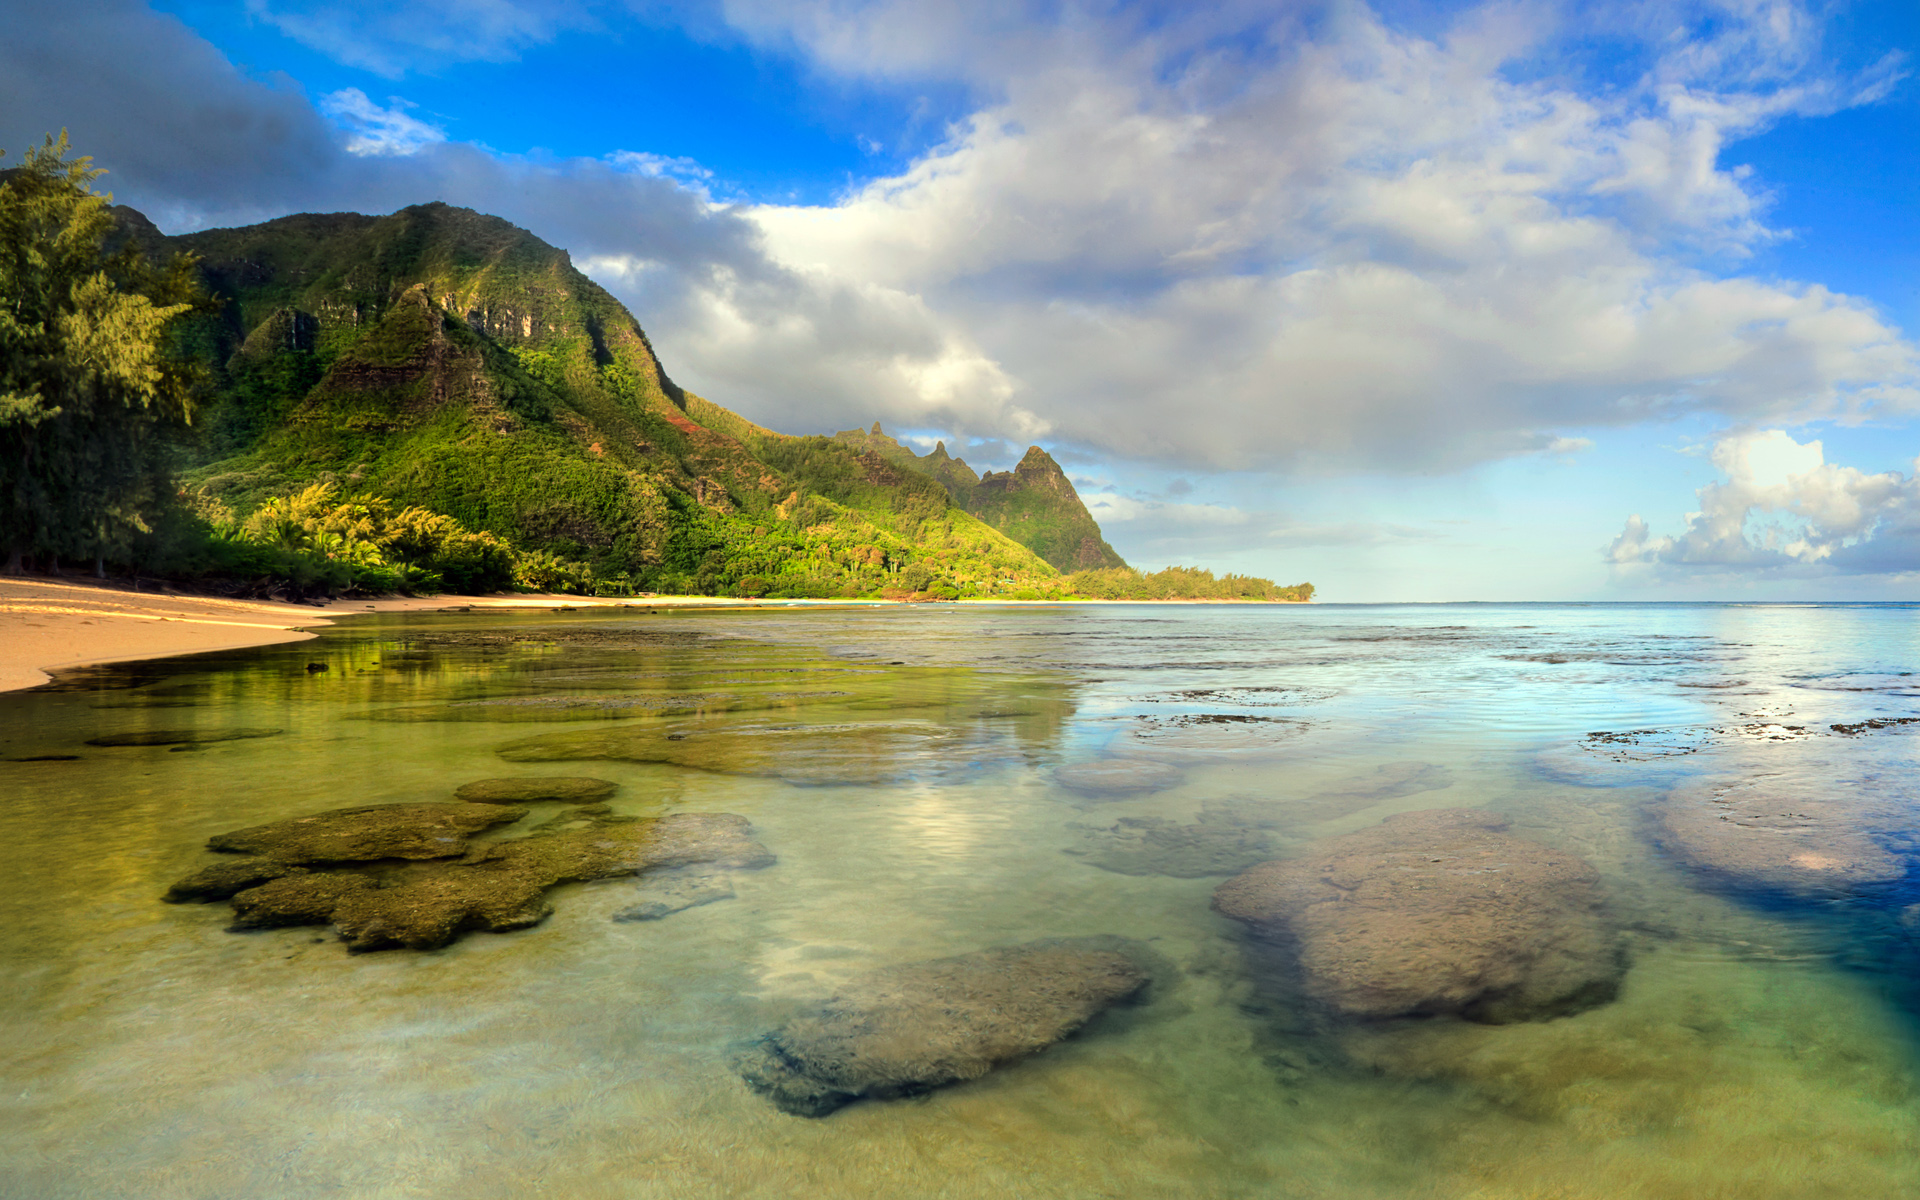  Beach seascape with coral reef underwater Kauai HD Wallpapers 1920x1200